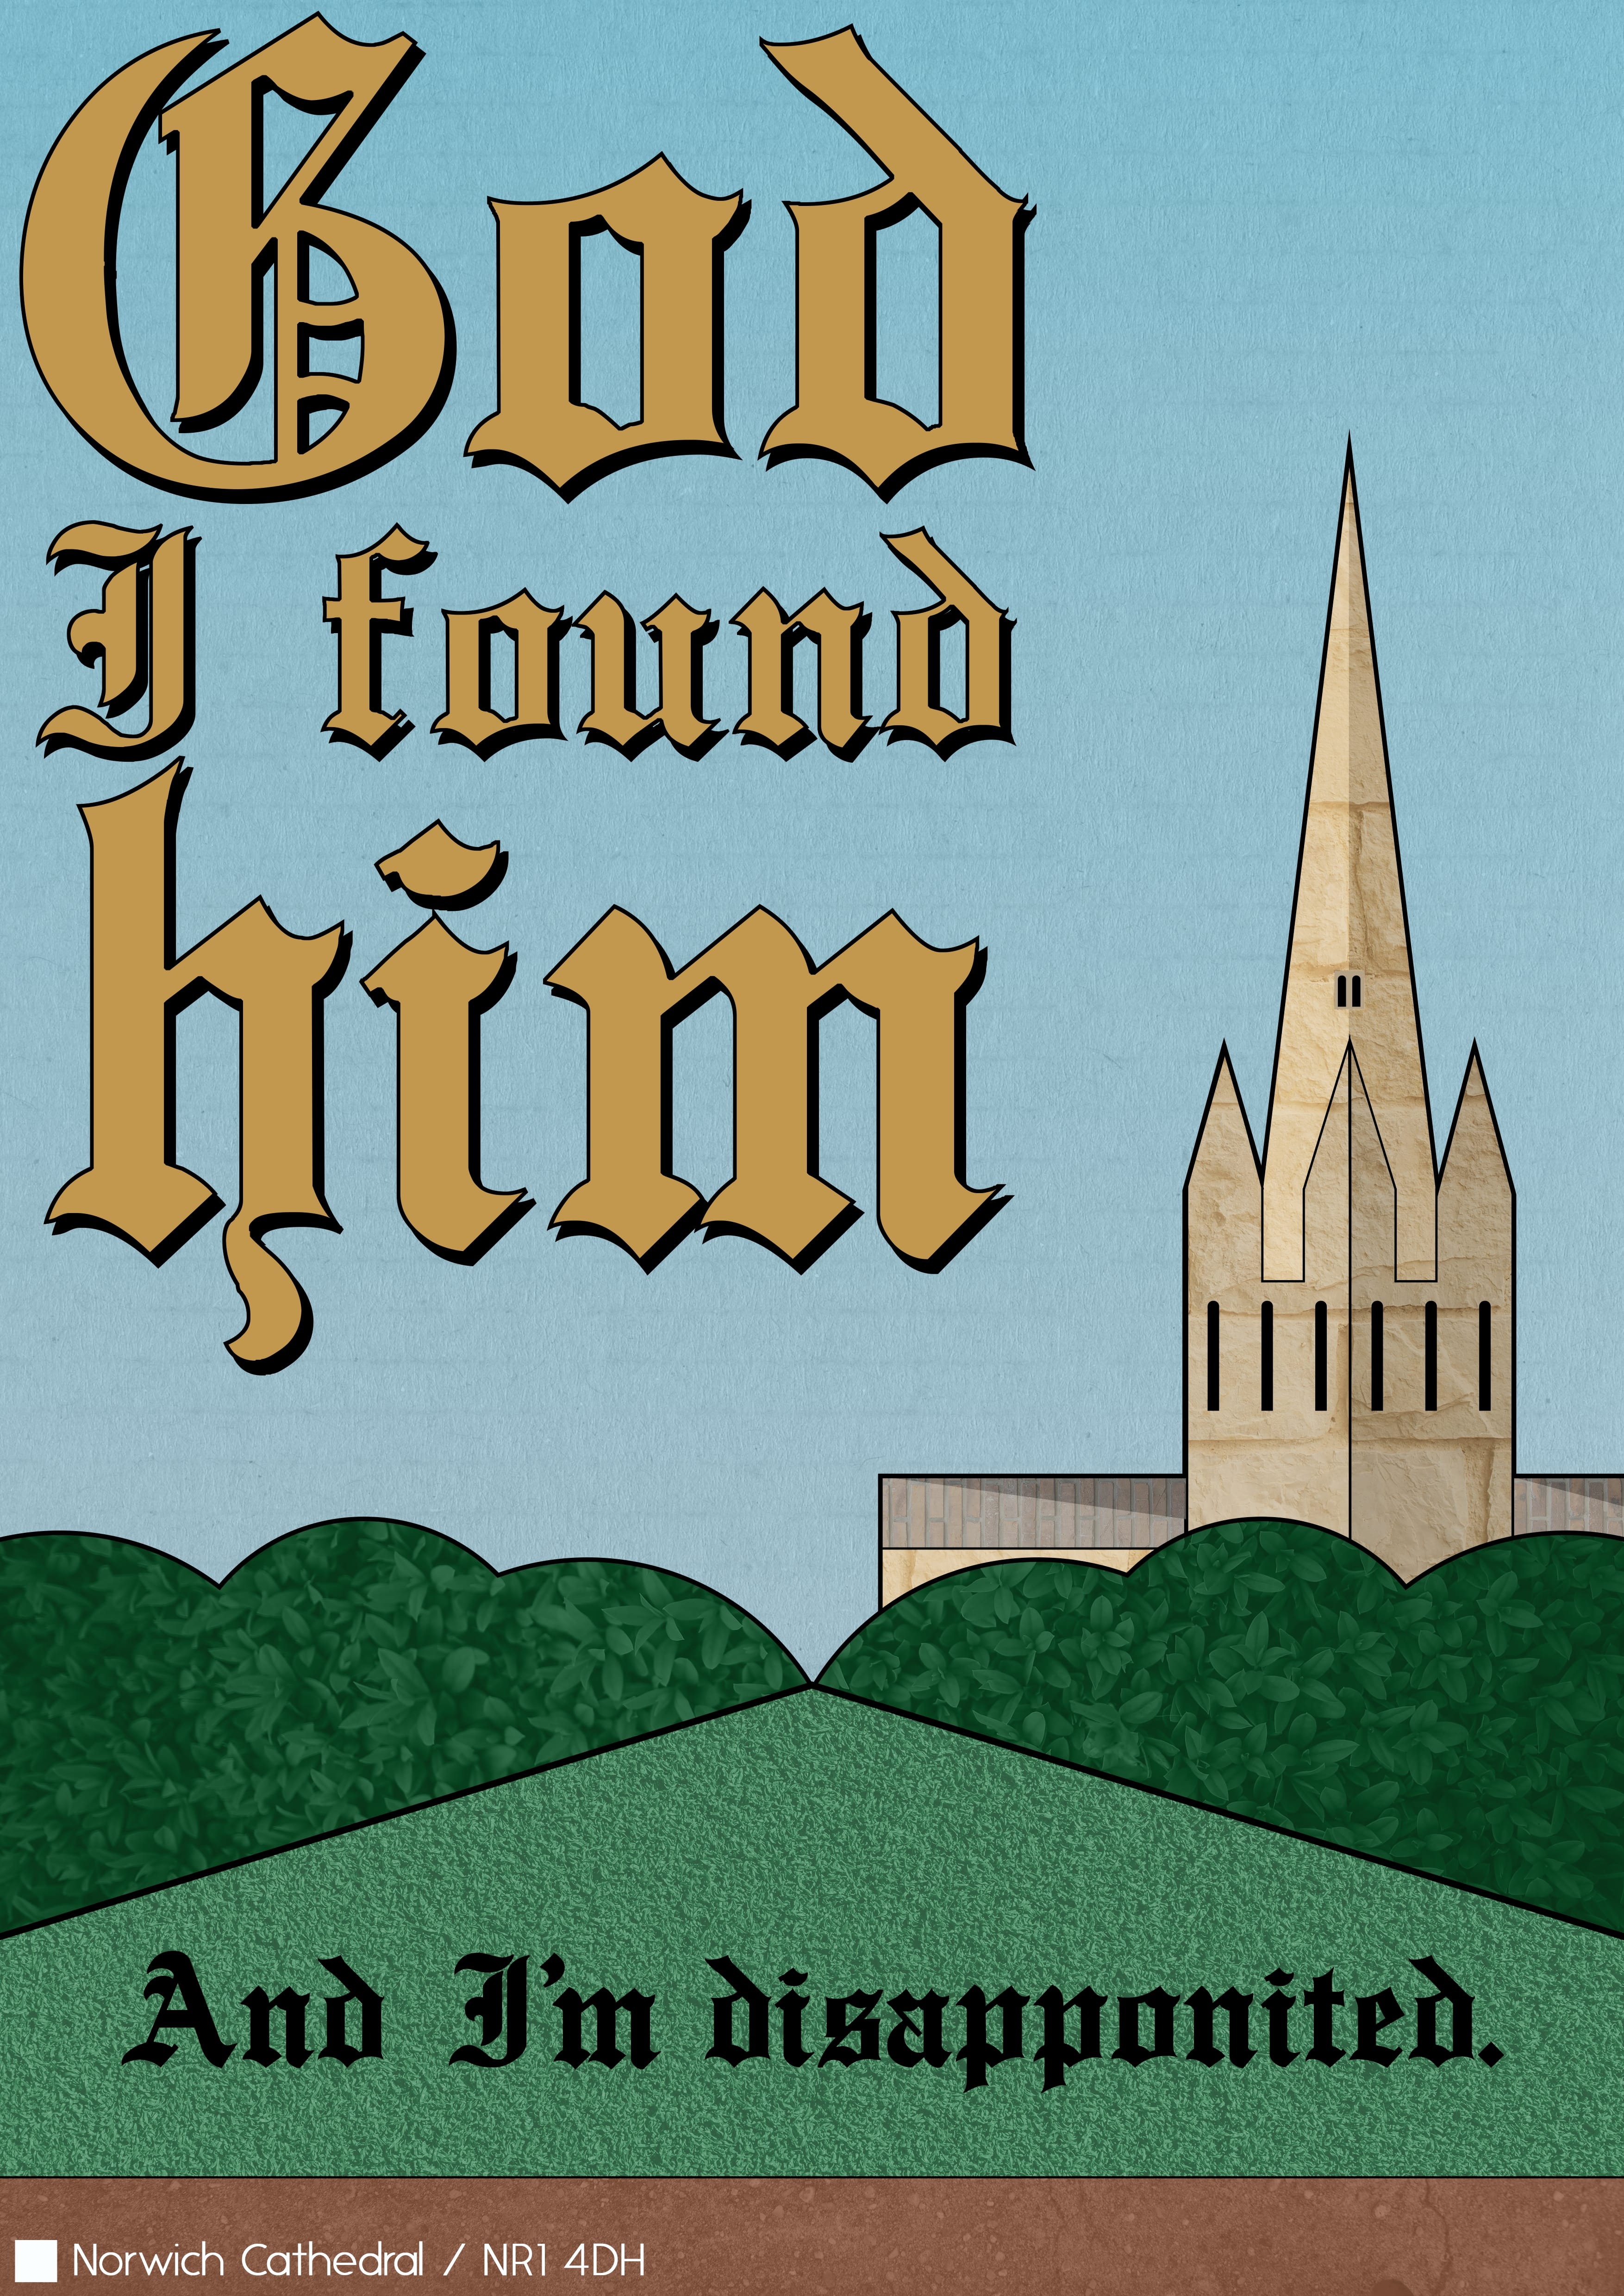 MA Communication Design work by Luke Sorrell showing a colourful stylized version of the Norwich Cathedral with a bad review and stylised text.